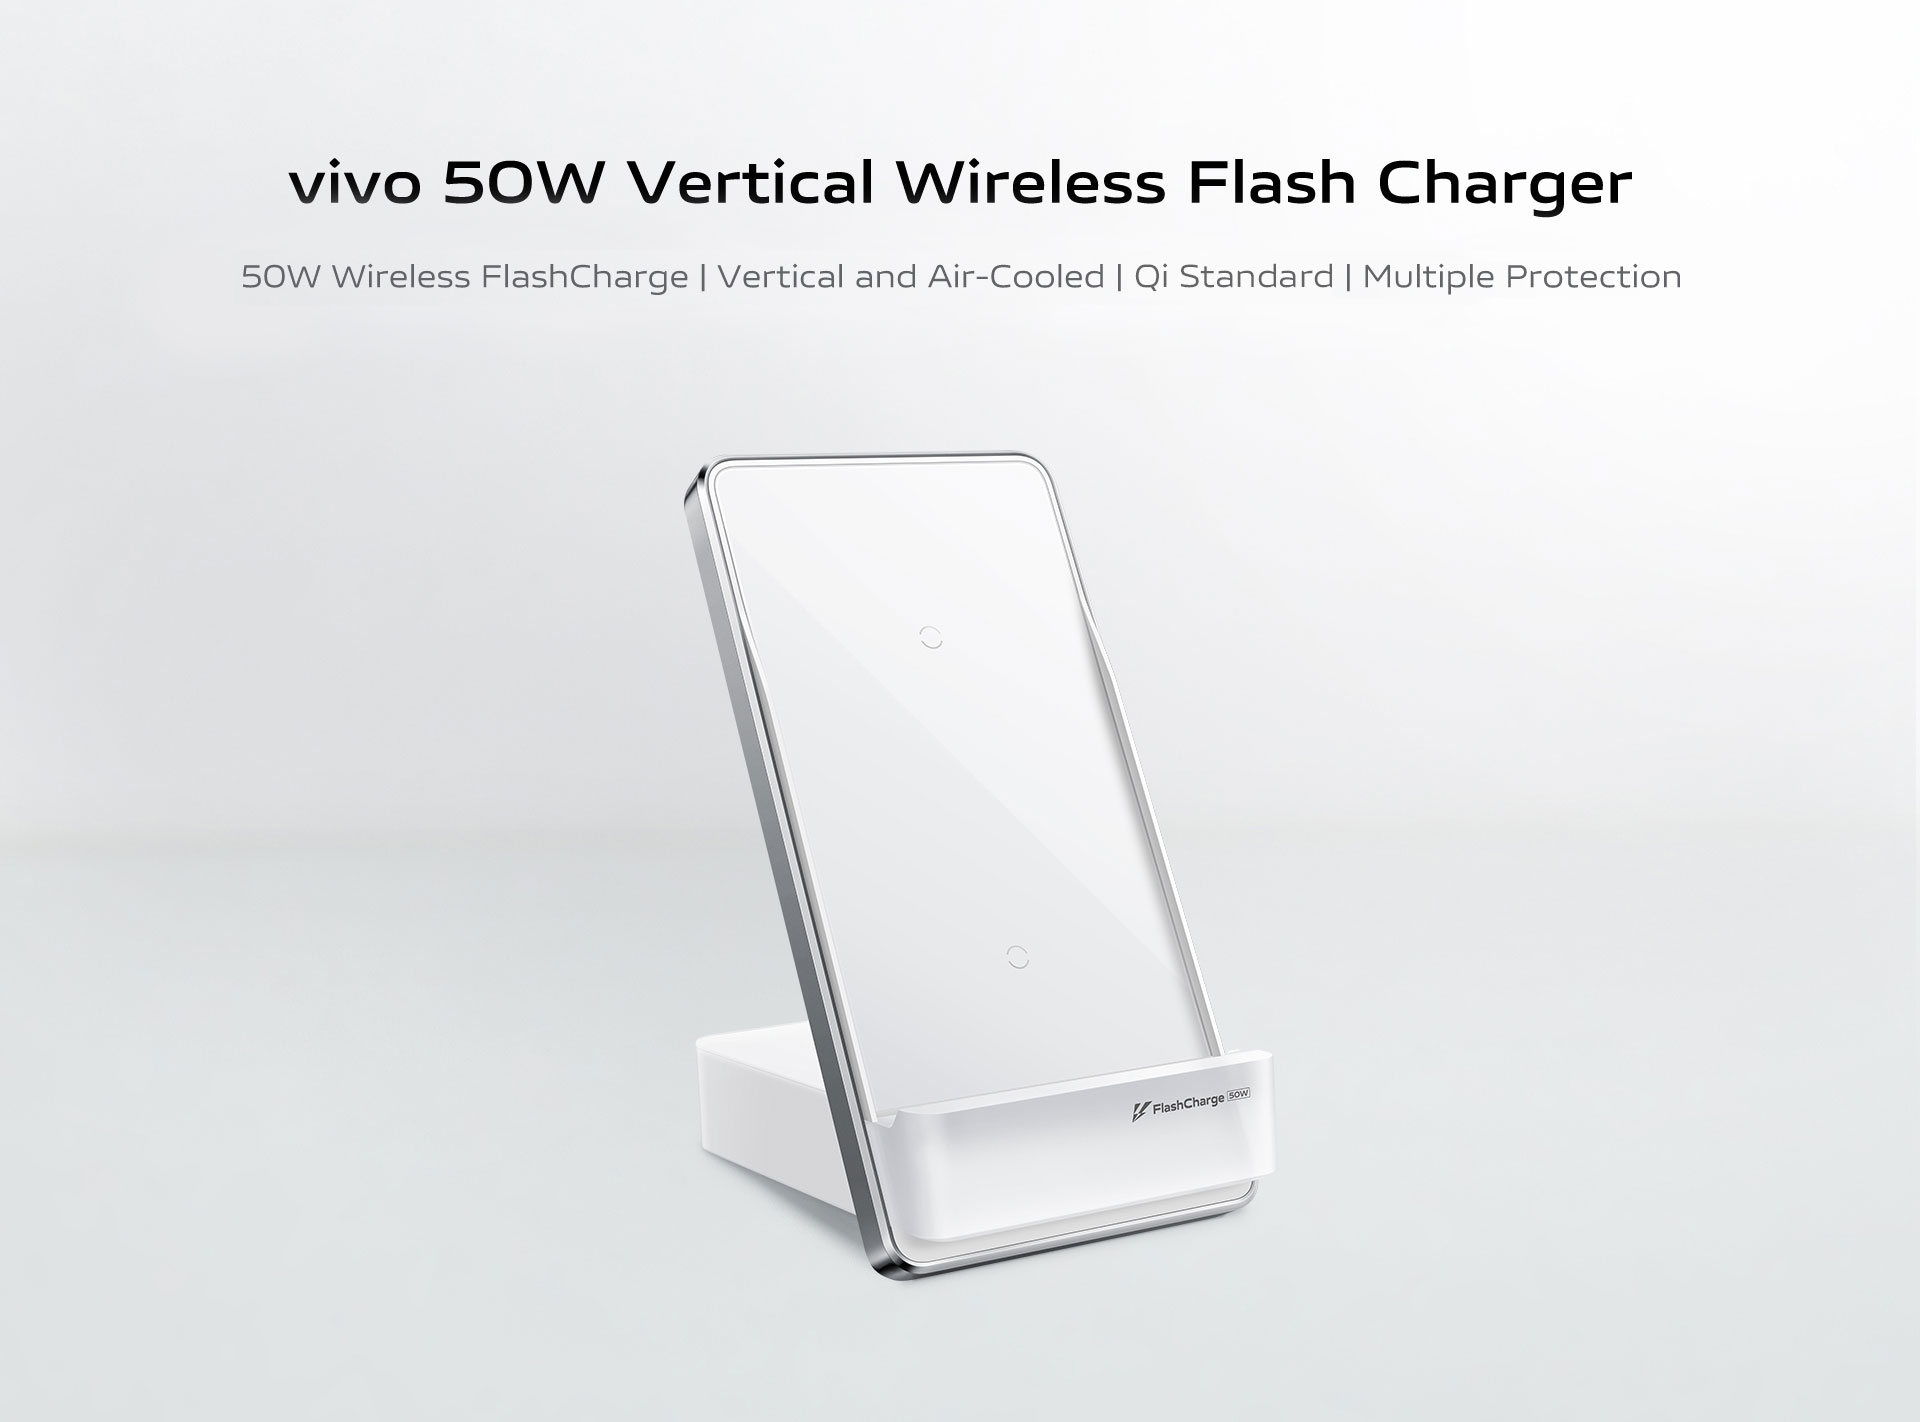 Vivo 50W Wireless Flash Charger test: Works with proprietary cable, adaptor